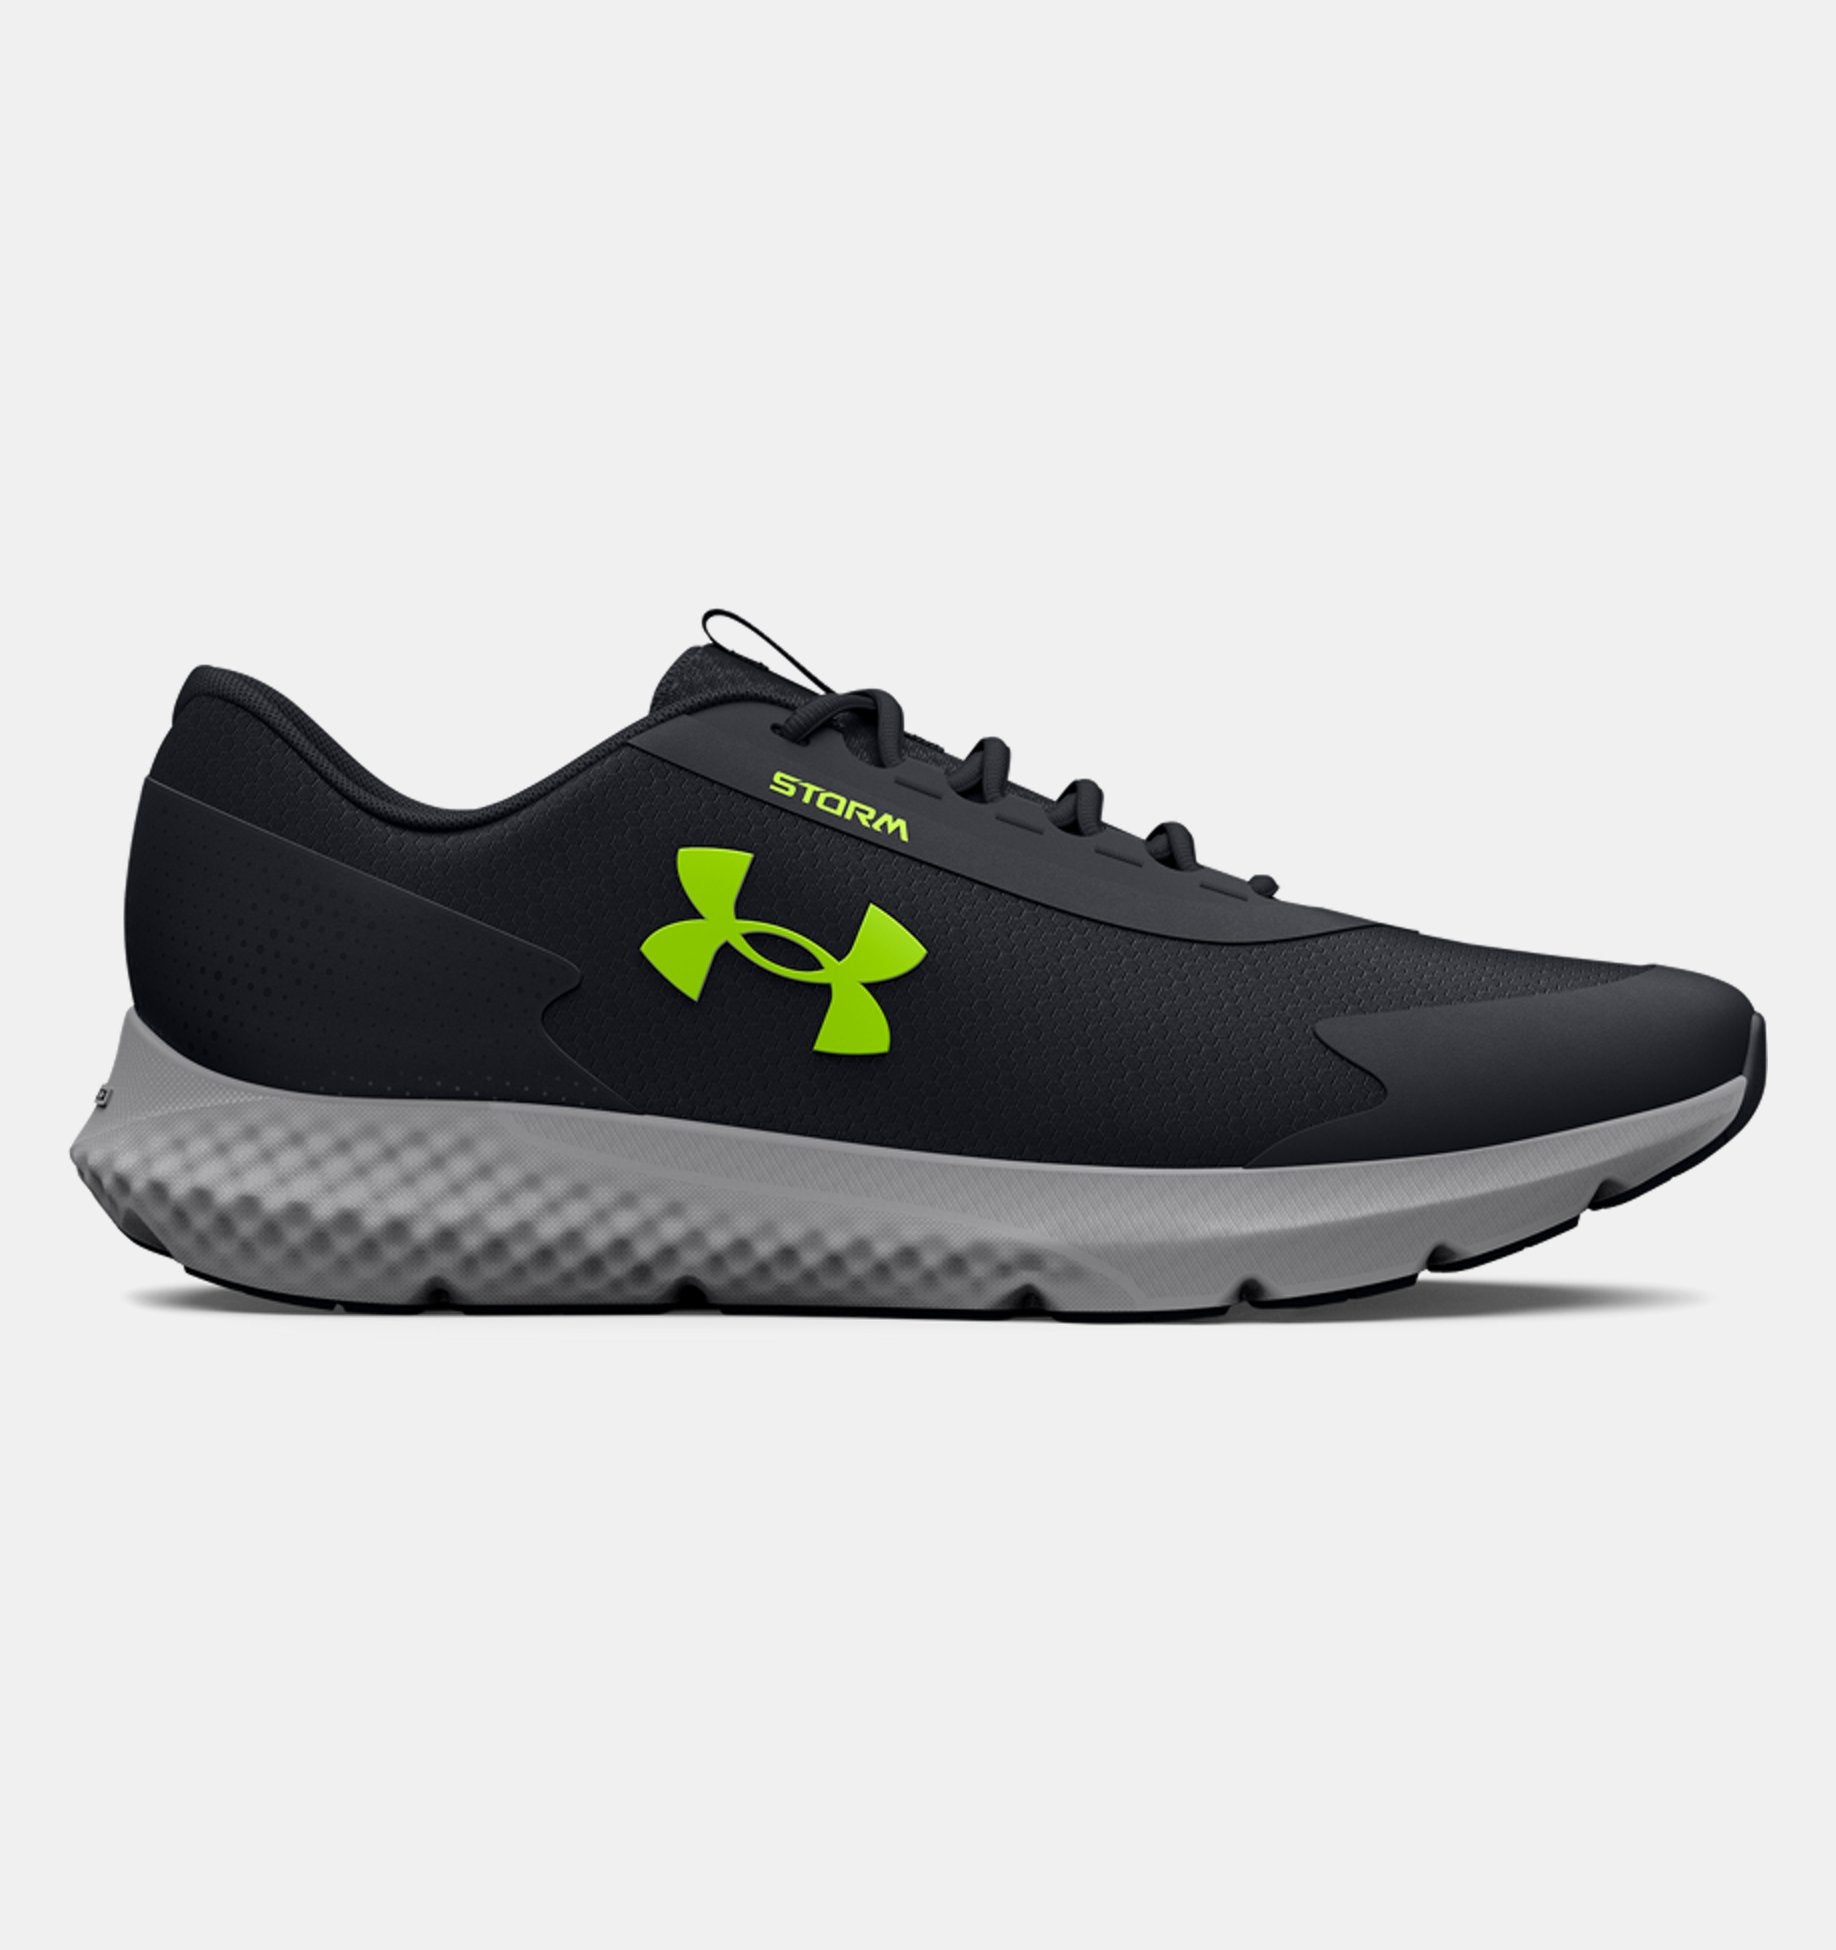 Under Armour Charged Rogue 3 Storm Black – Sedgars SA